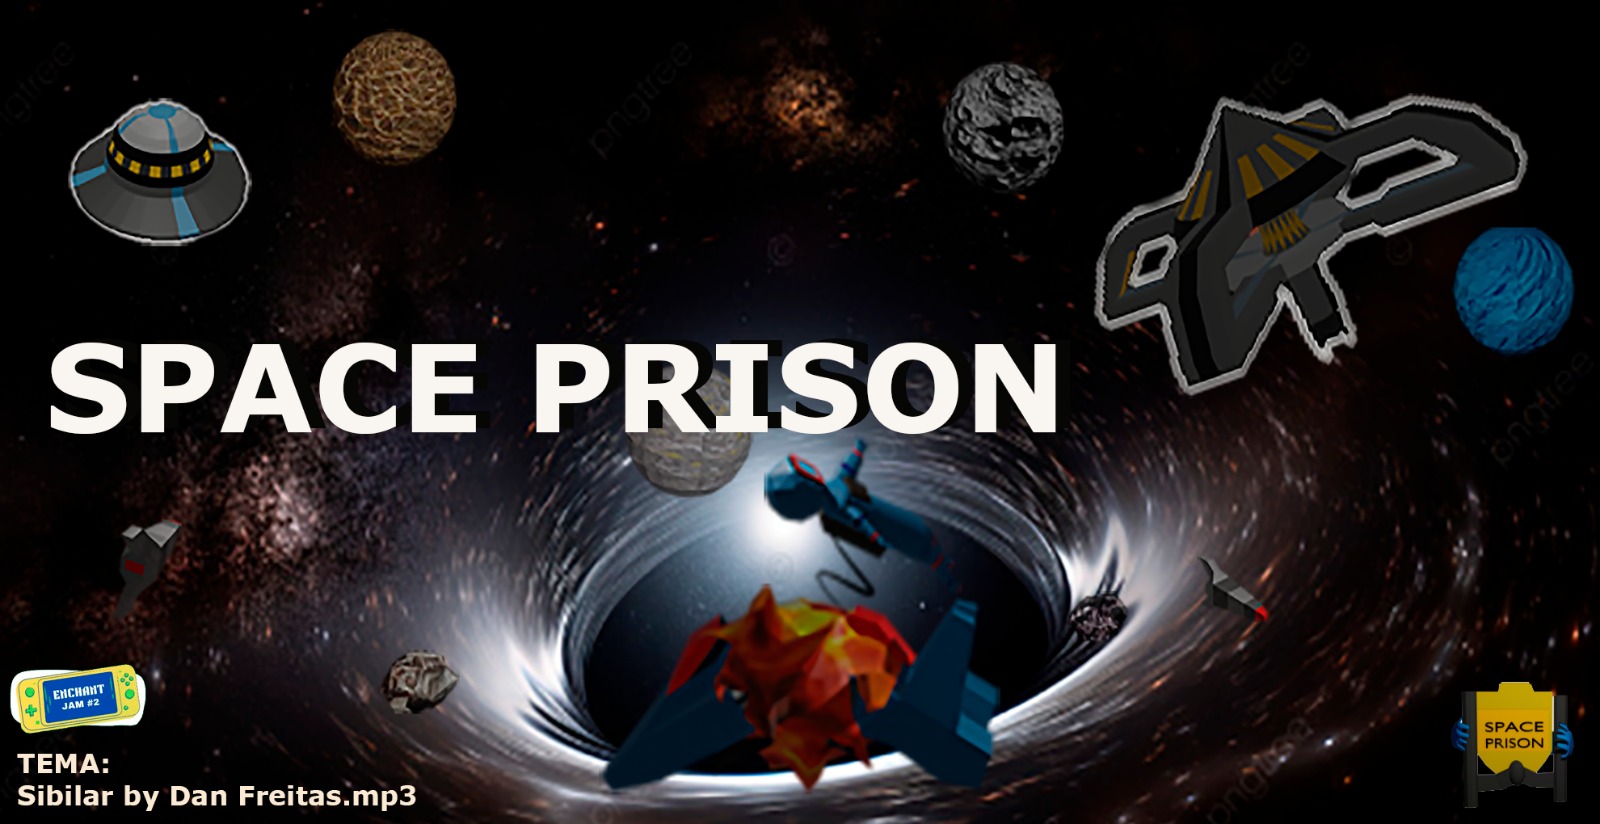 Space Prision